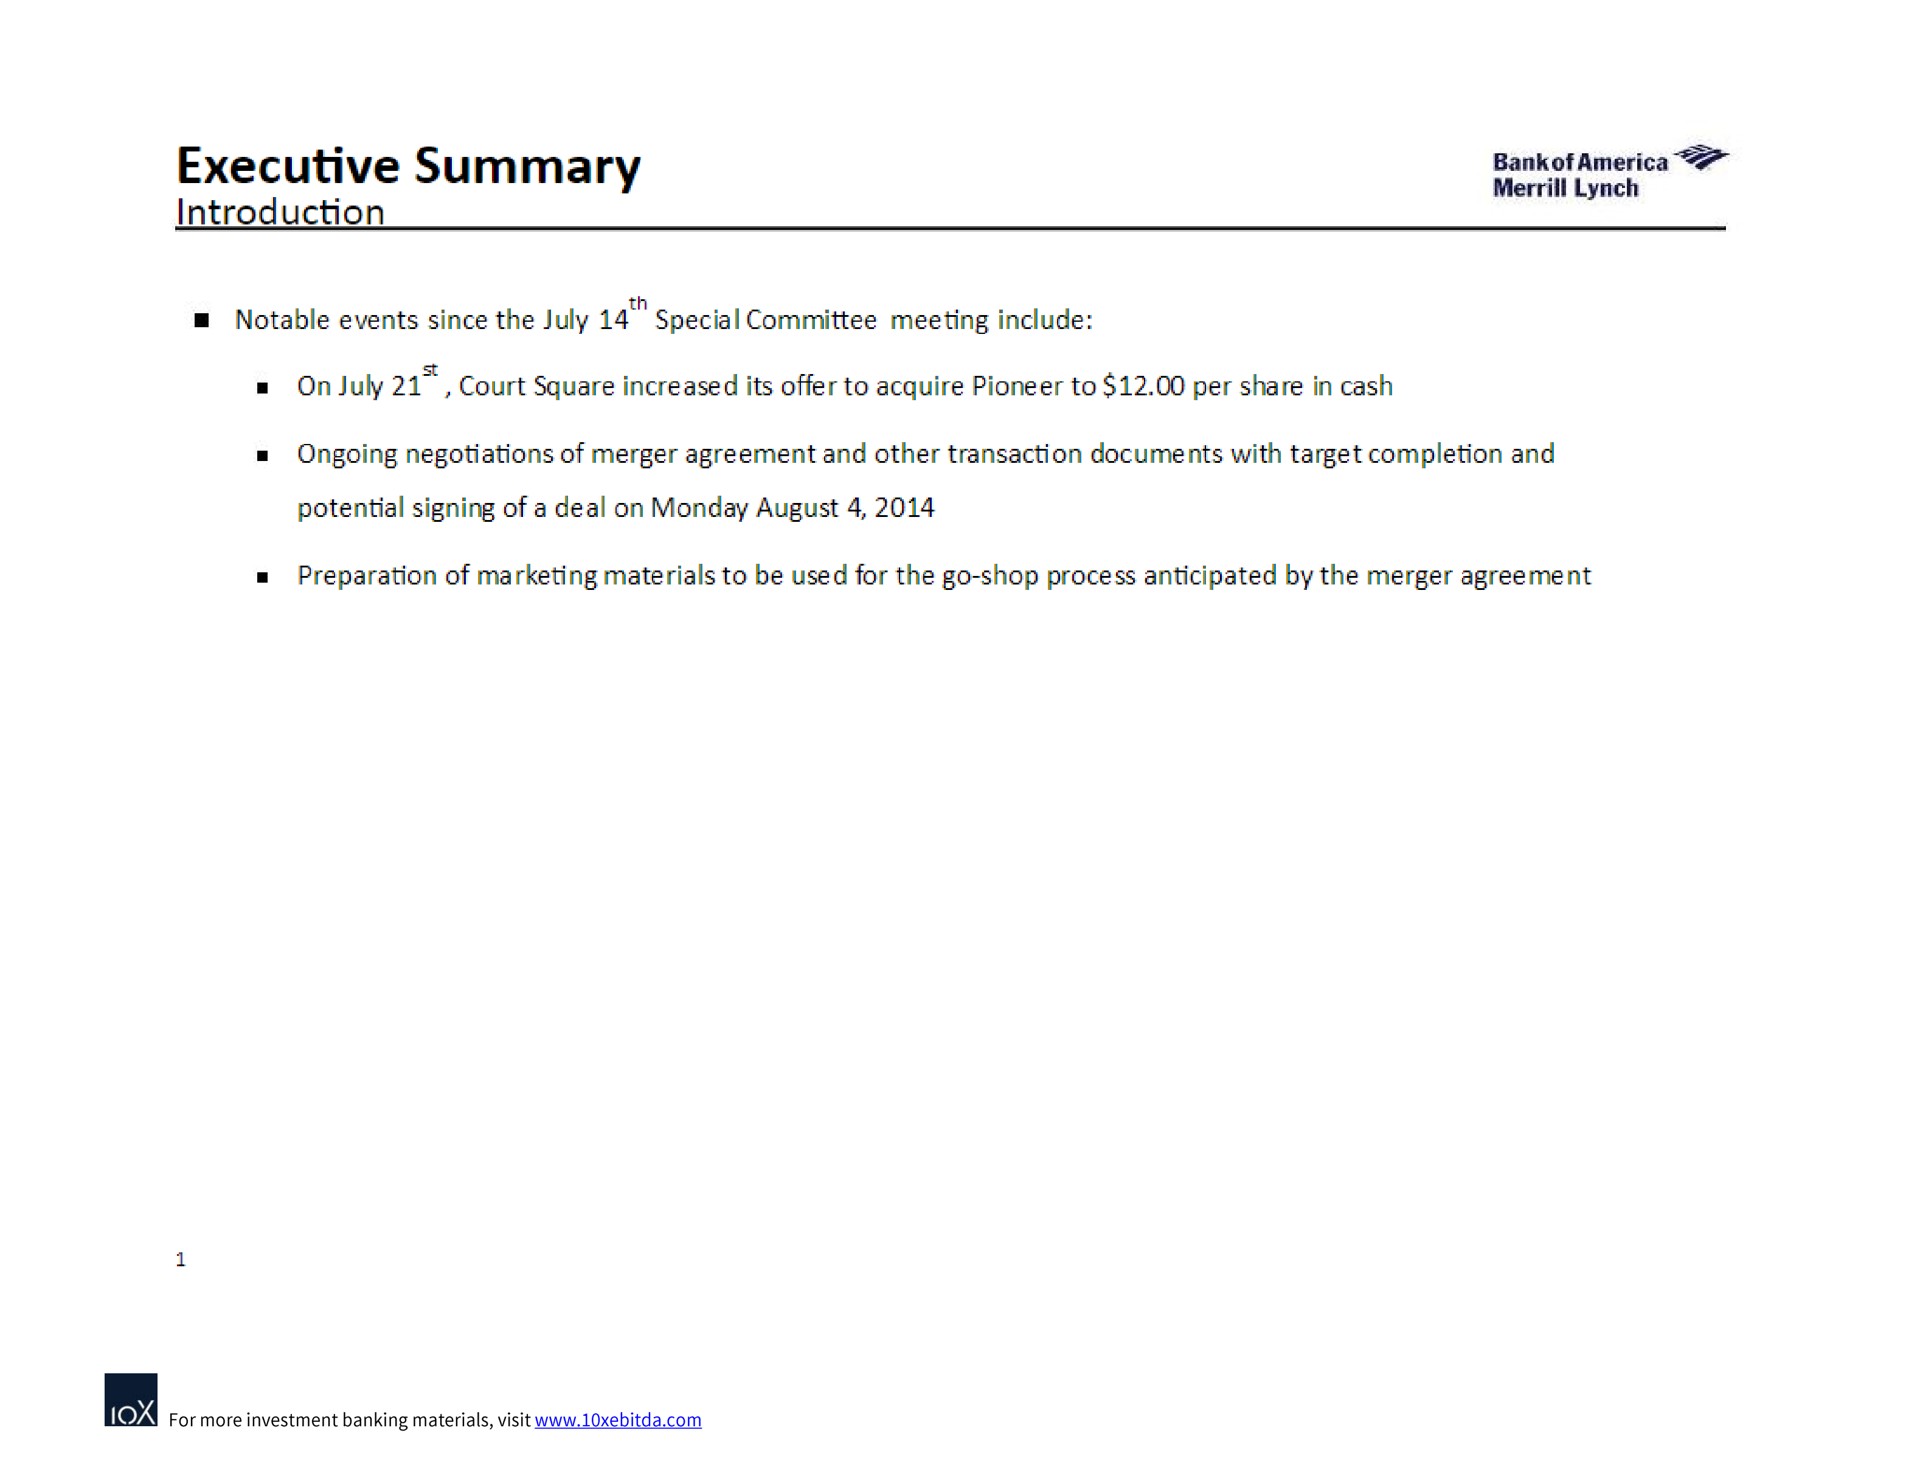 executive summary introduction | Bank of America